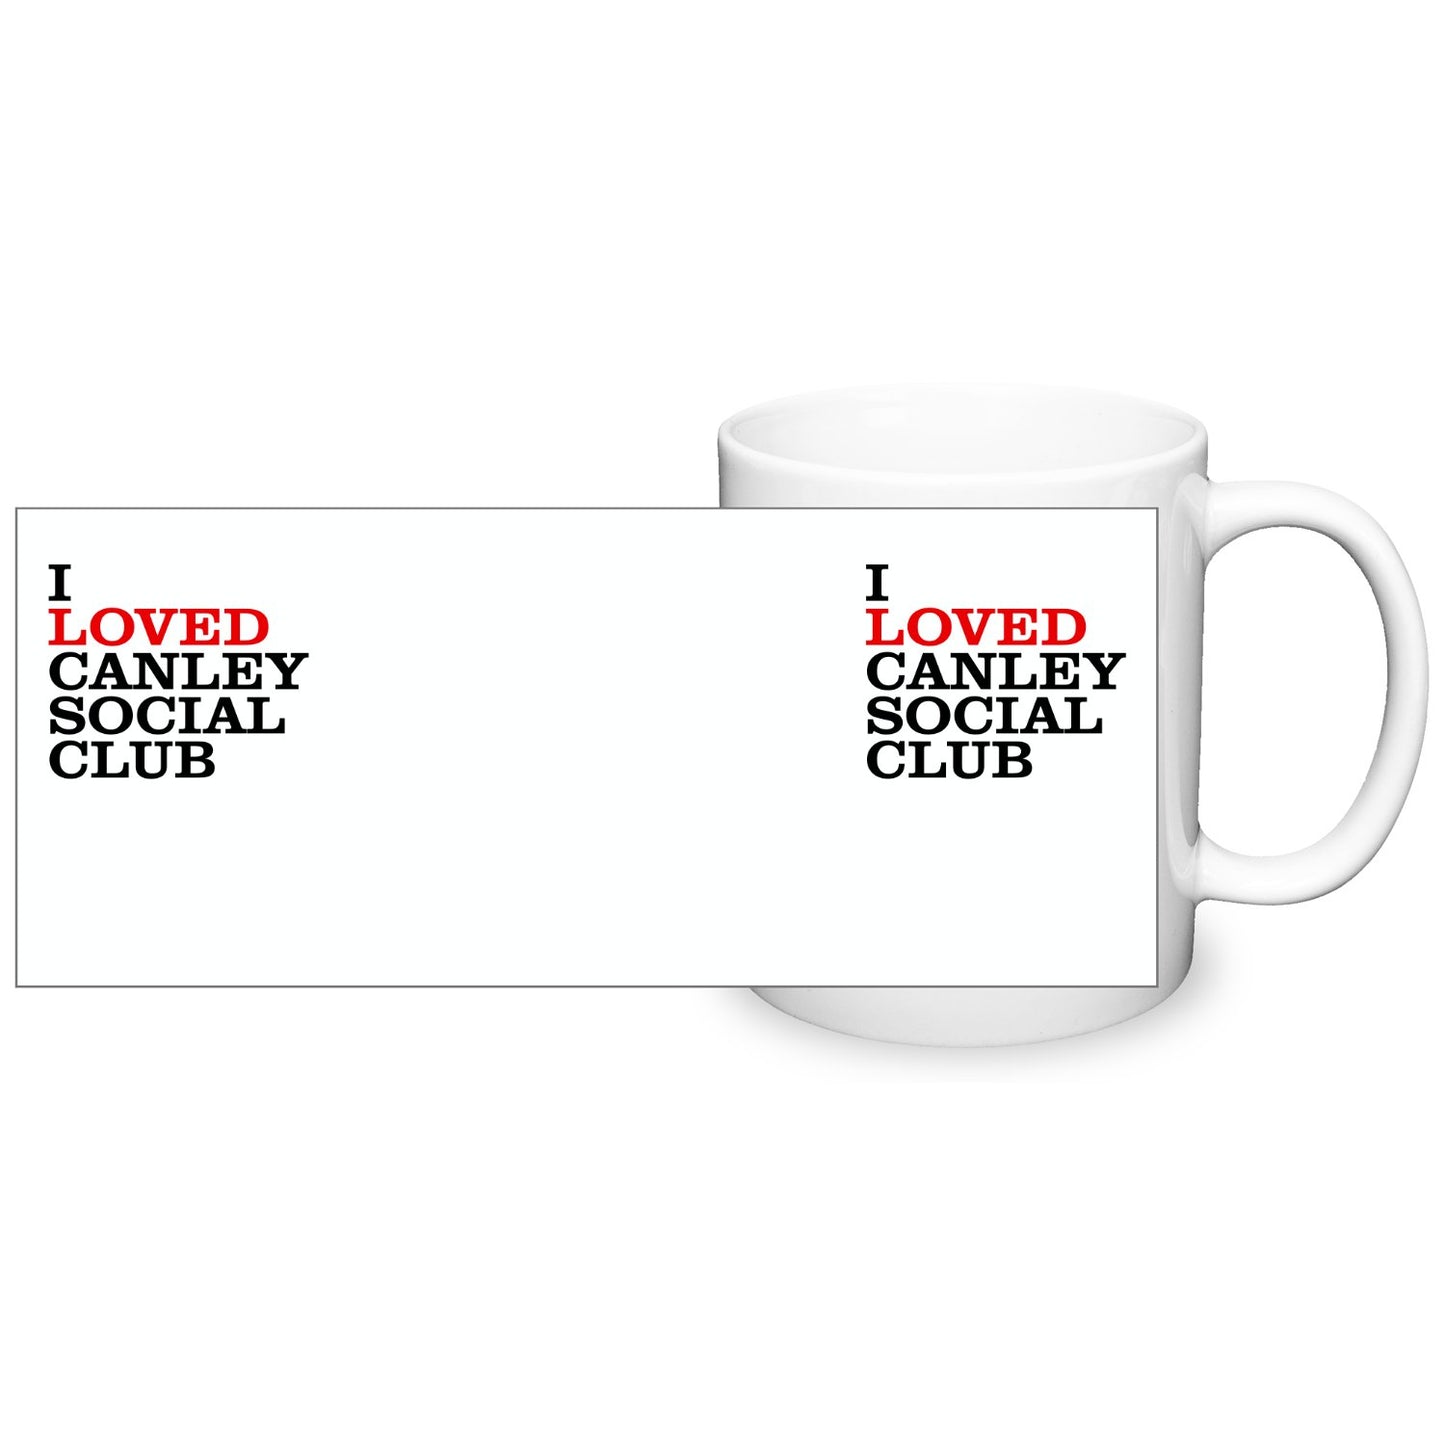 I loved Canley Social Club - mug - Dirty Stop Outs